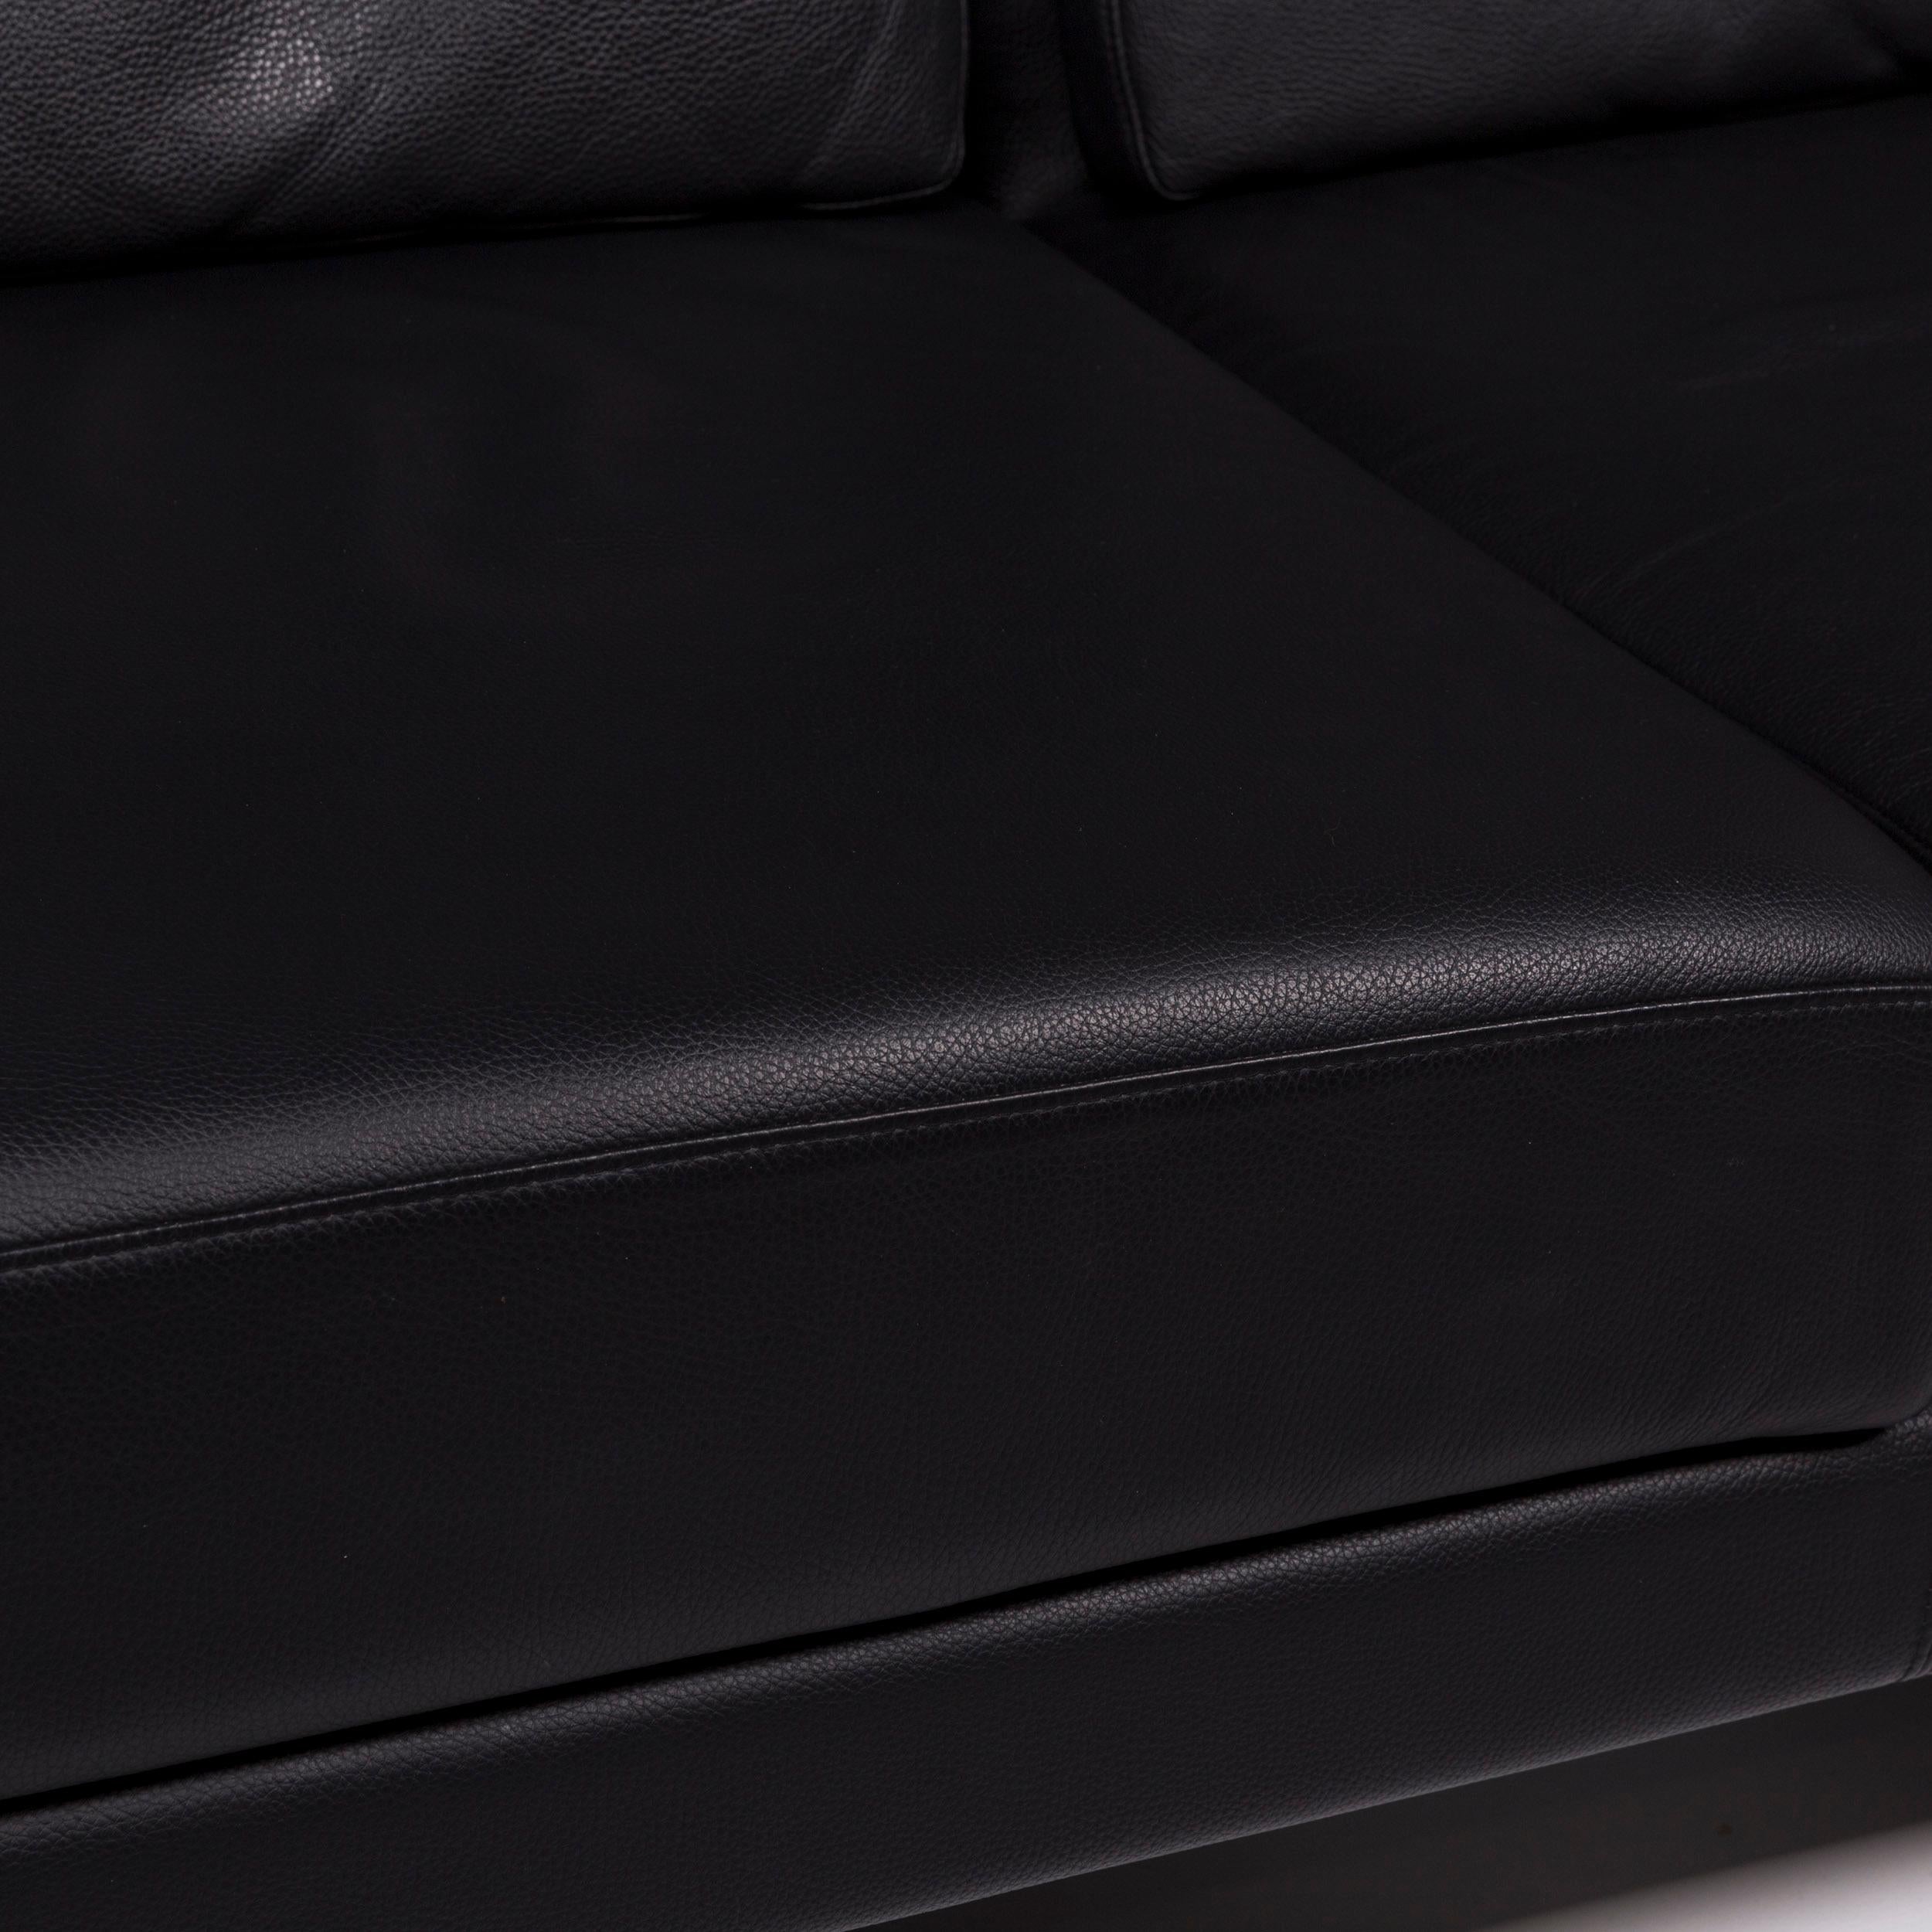 Modern Brühl & Sippold Moule Leather Sofa Black Two-Seat